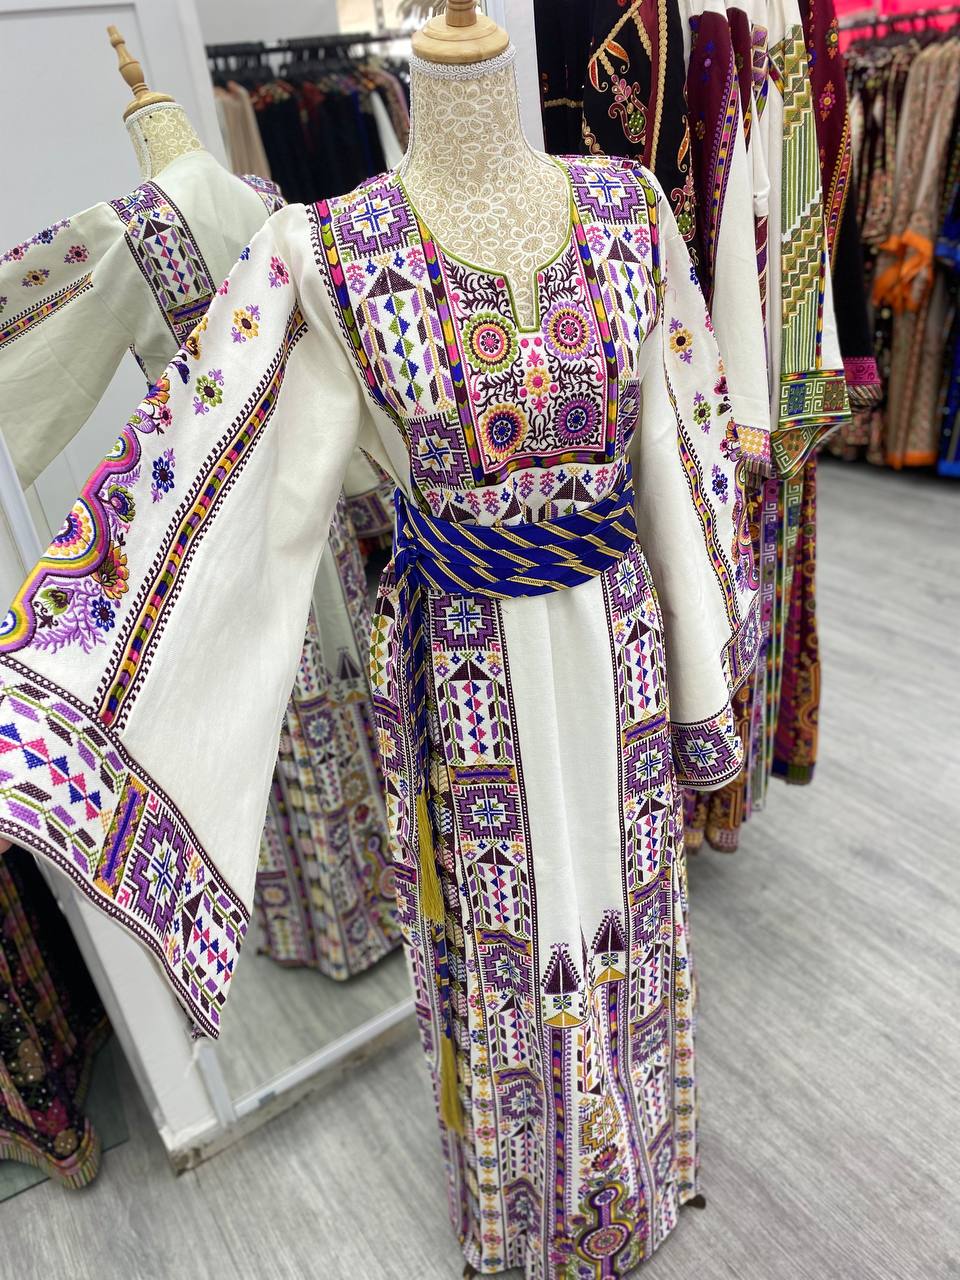 Etameen white thobe with purpel embroidery